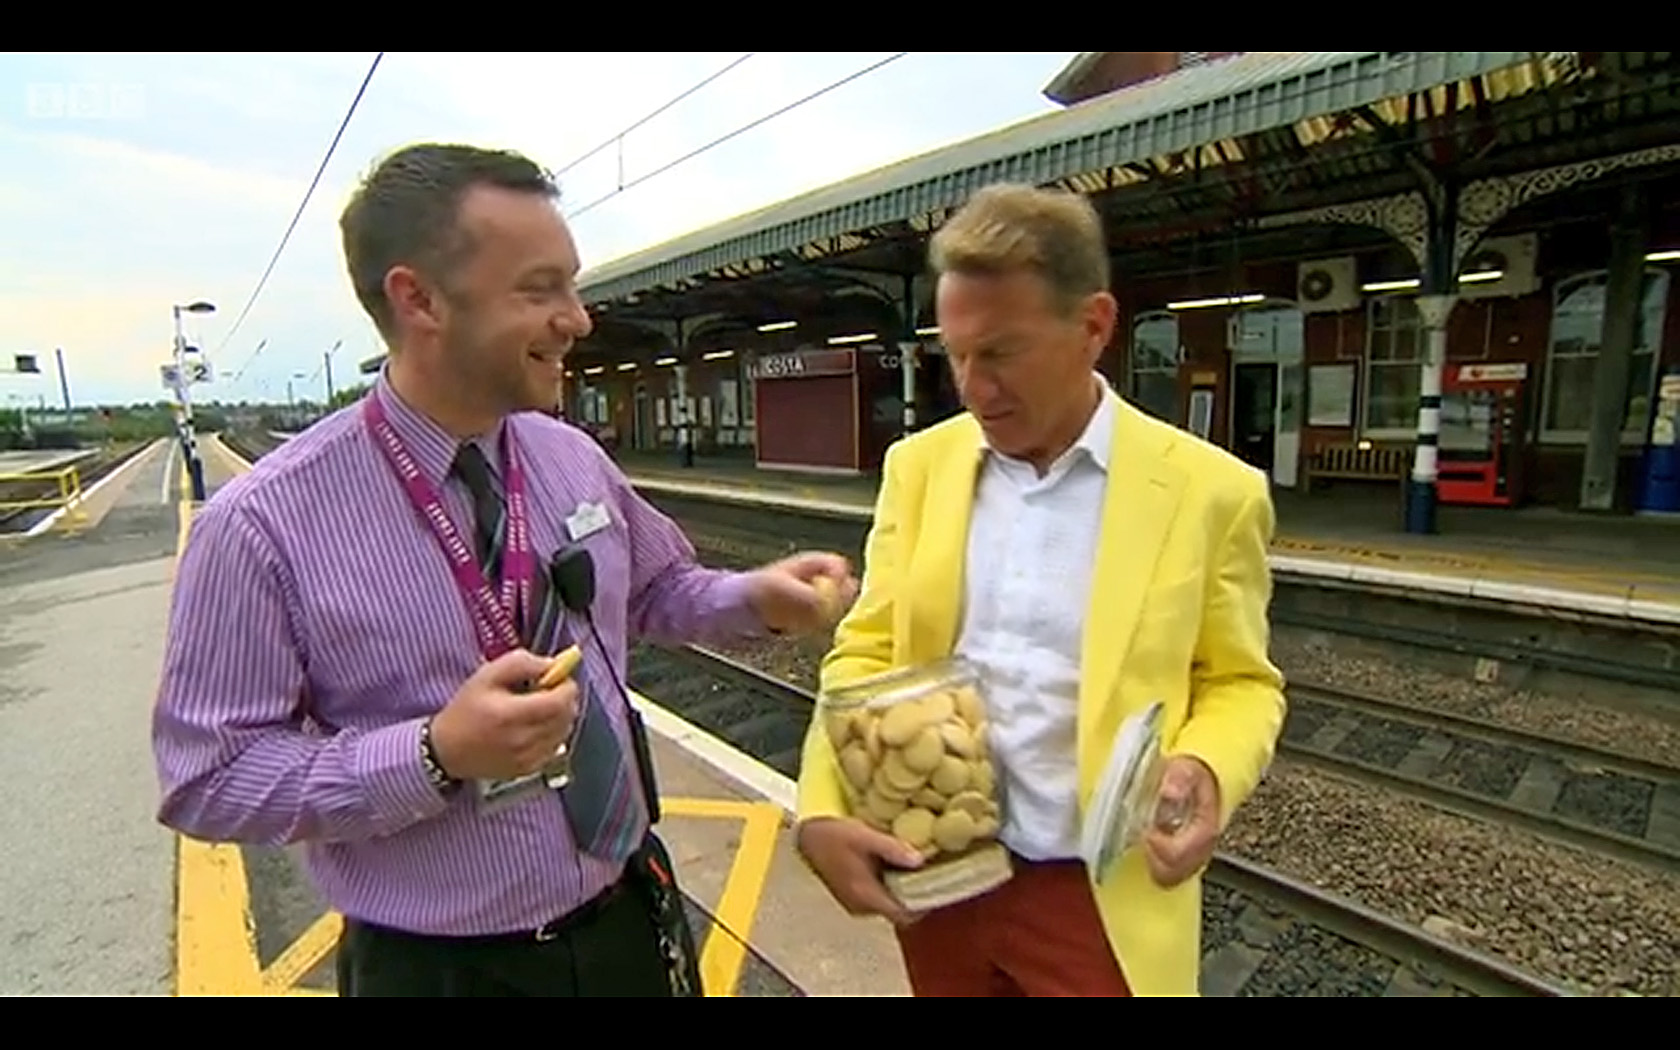 Michael Portillo shares his Grantham Gingerbread with a member of the East Coast staff at the station. From Great British Railway Journeys Series 6: 11 Derby to Grantham, © BBC